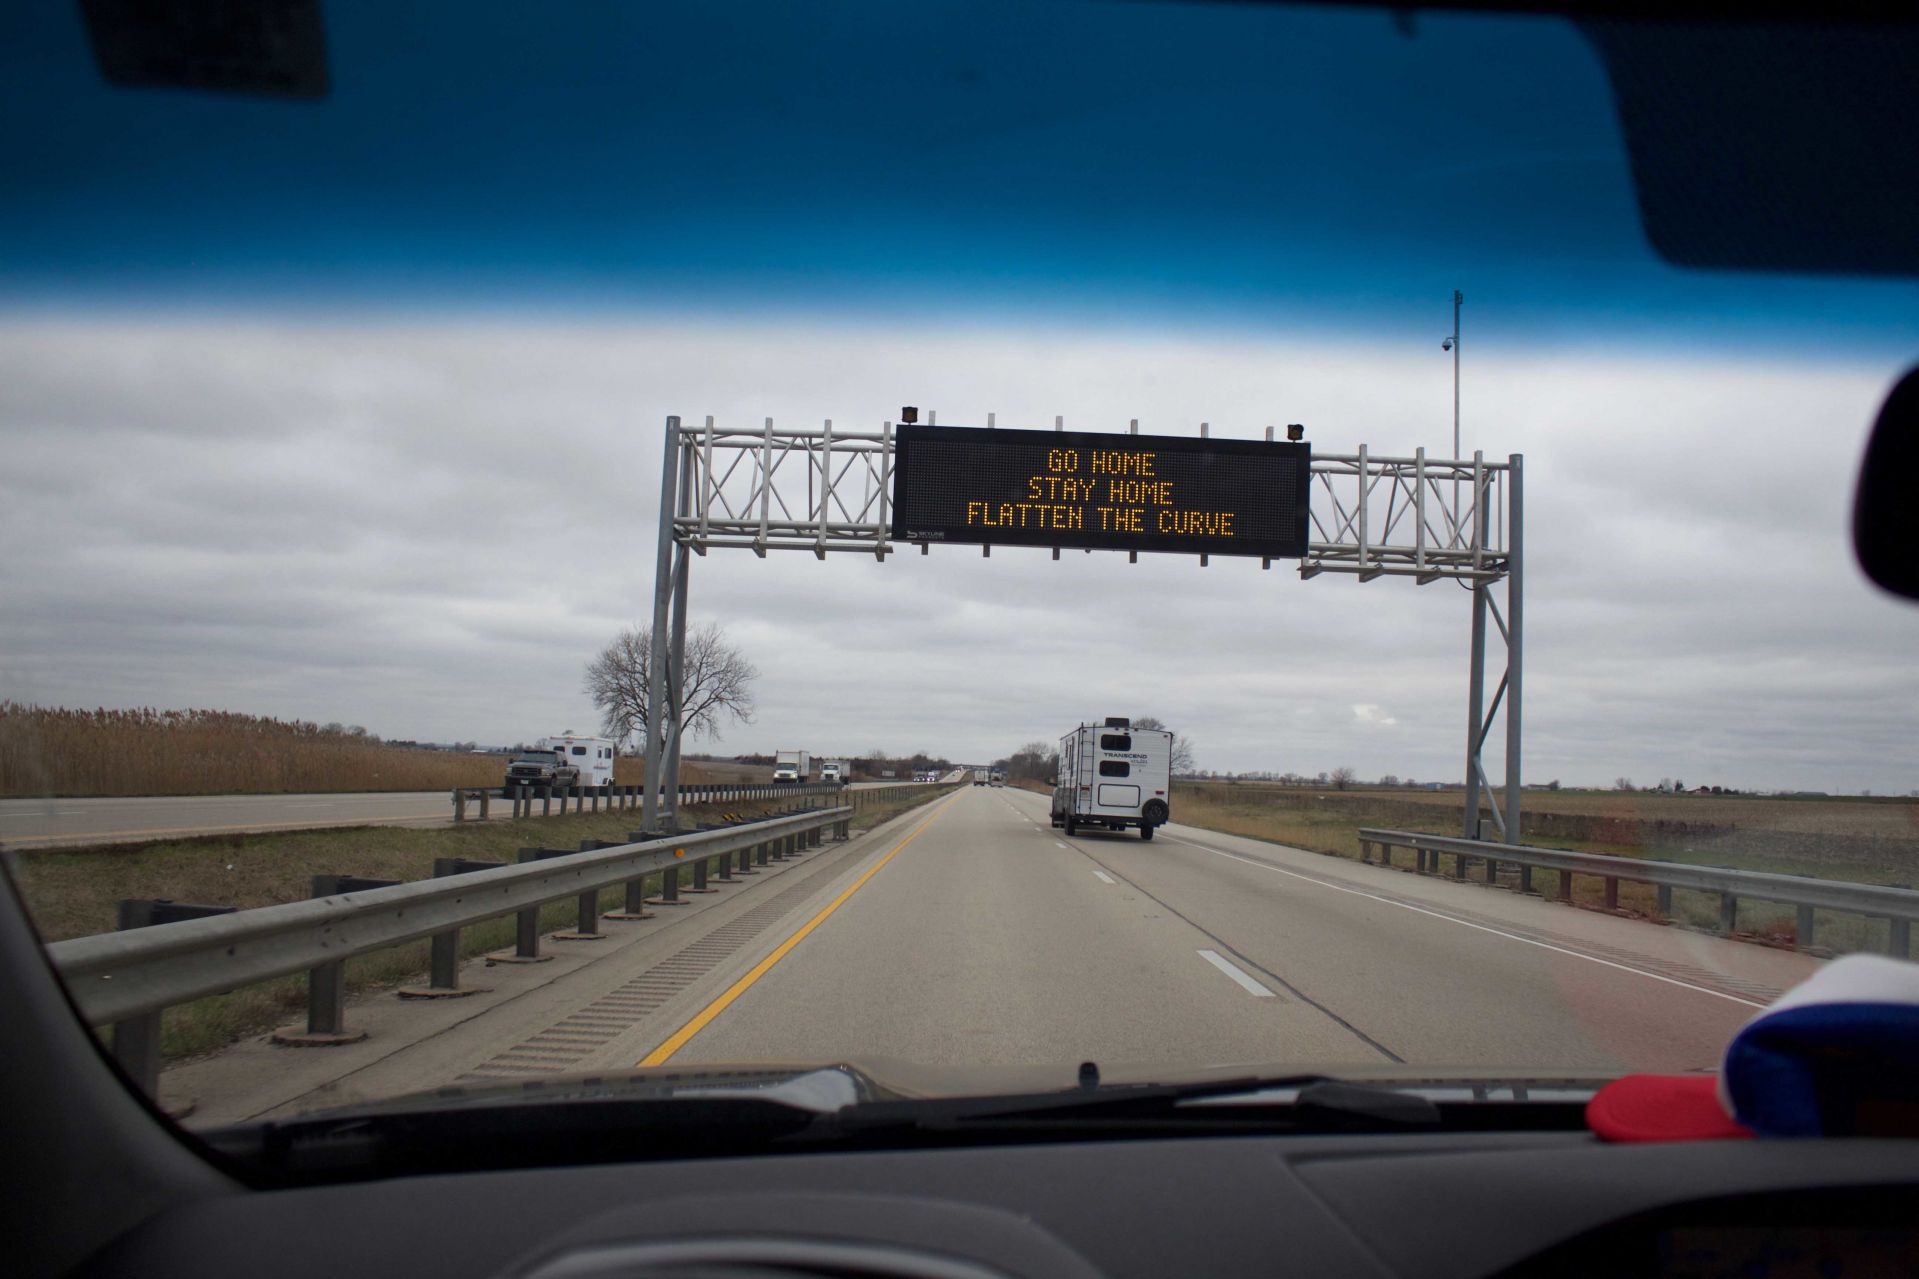 An Indiana Department of Transportation sign on I-80 tells drivers to “Go Home, Stay Home, Flatten The Curve," on March 31, 2020. (Photograph by Jackson Sell '22)